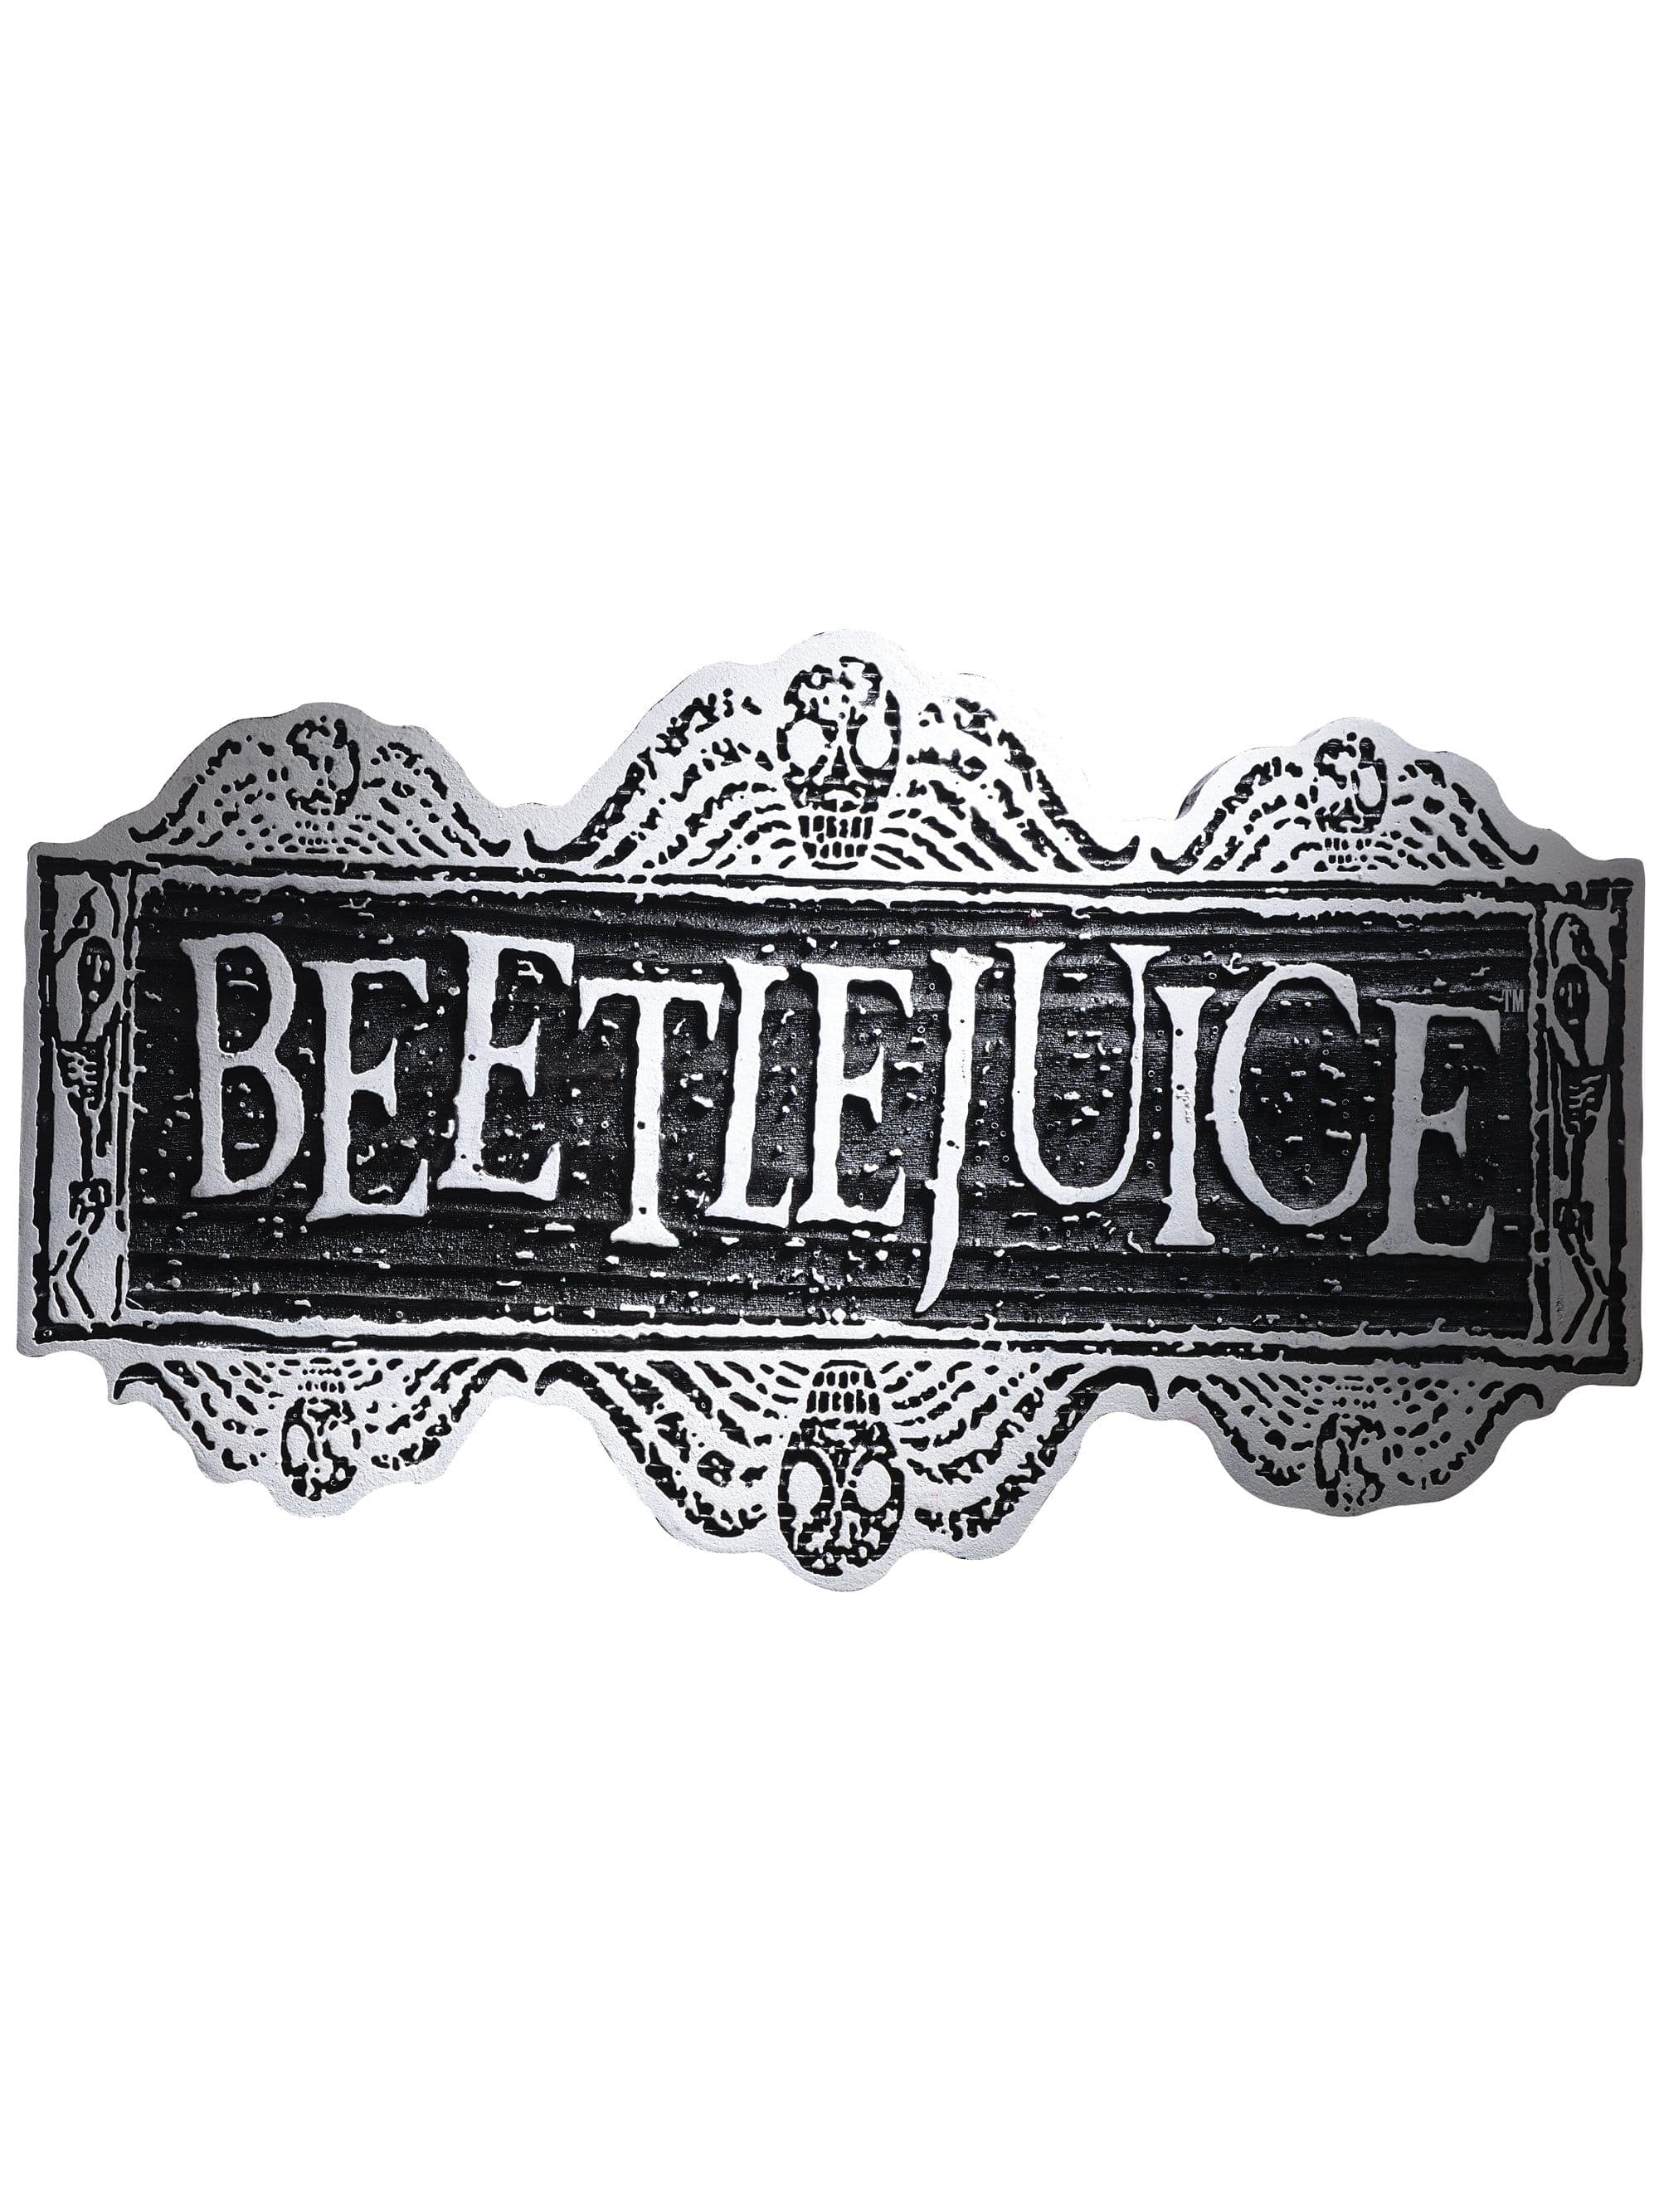 18-inch Beetlejuice Wall Decoration - costumes.com